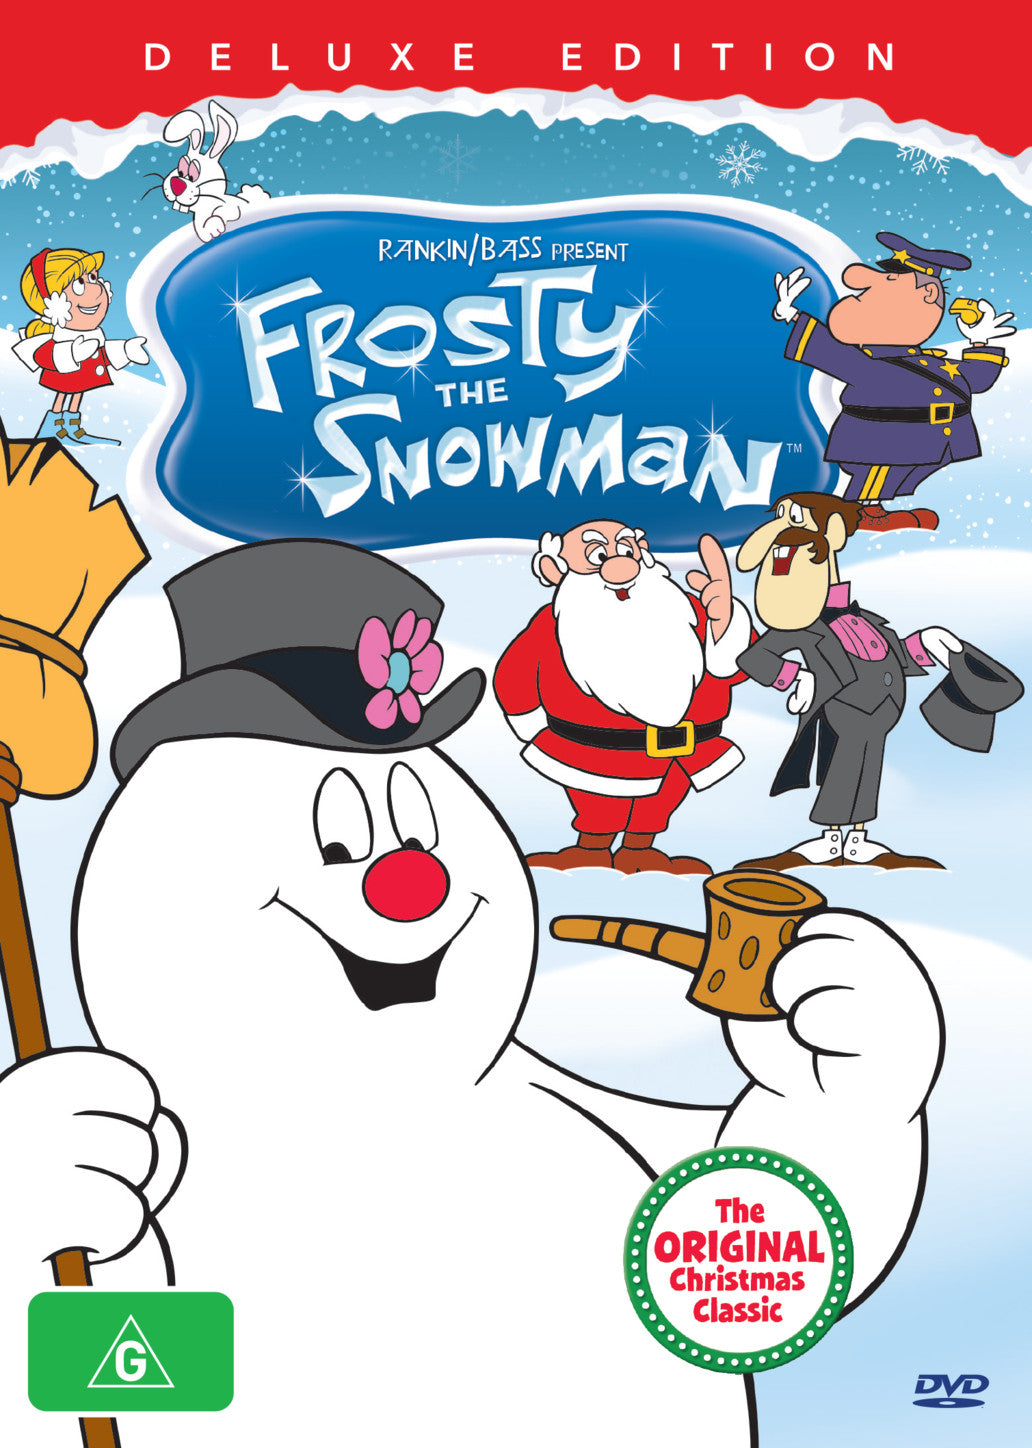 FROSTY THE SNOWMAN (WITH FROSTY RETURNS)